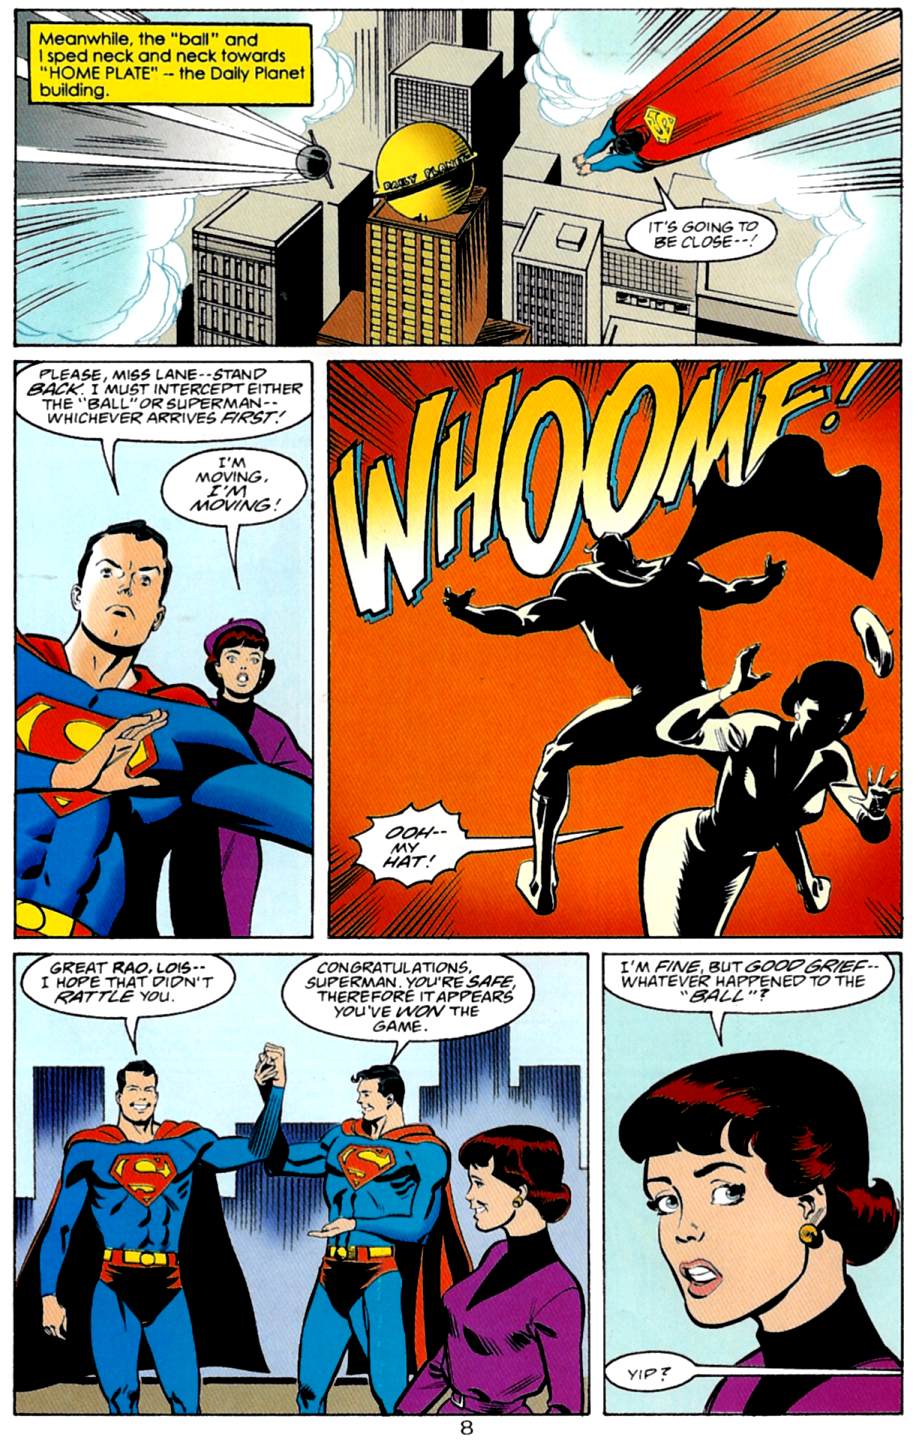 Adventures of Superman (1987) 558 Page 8